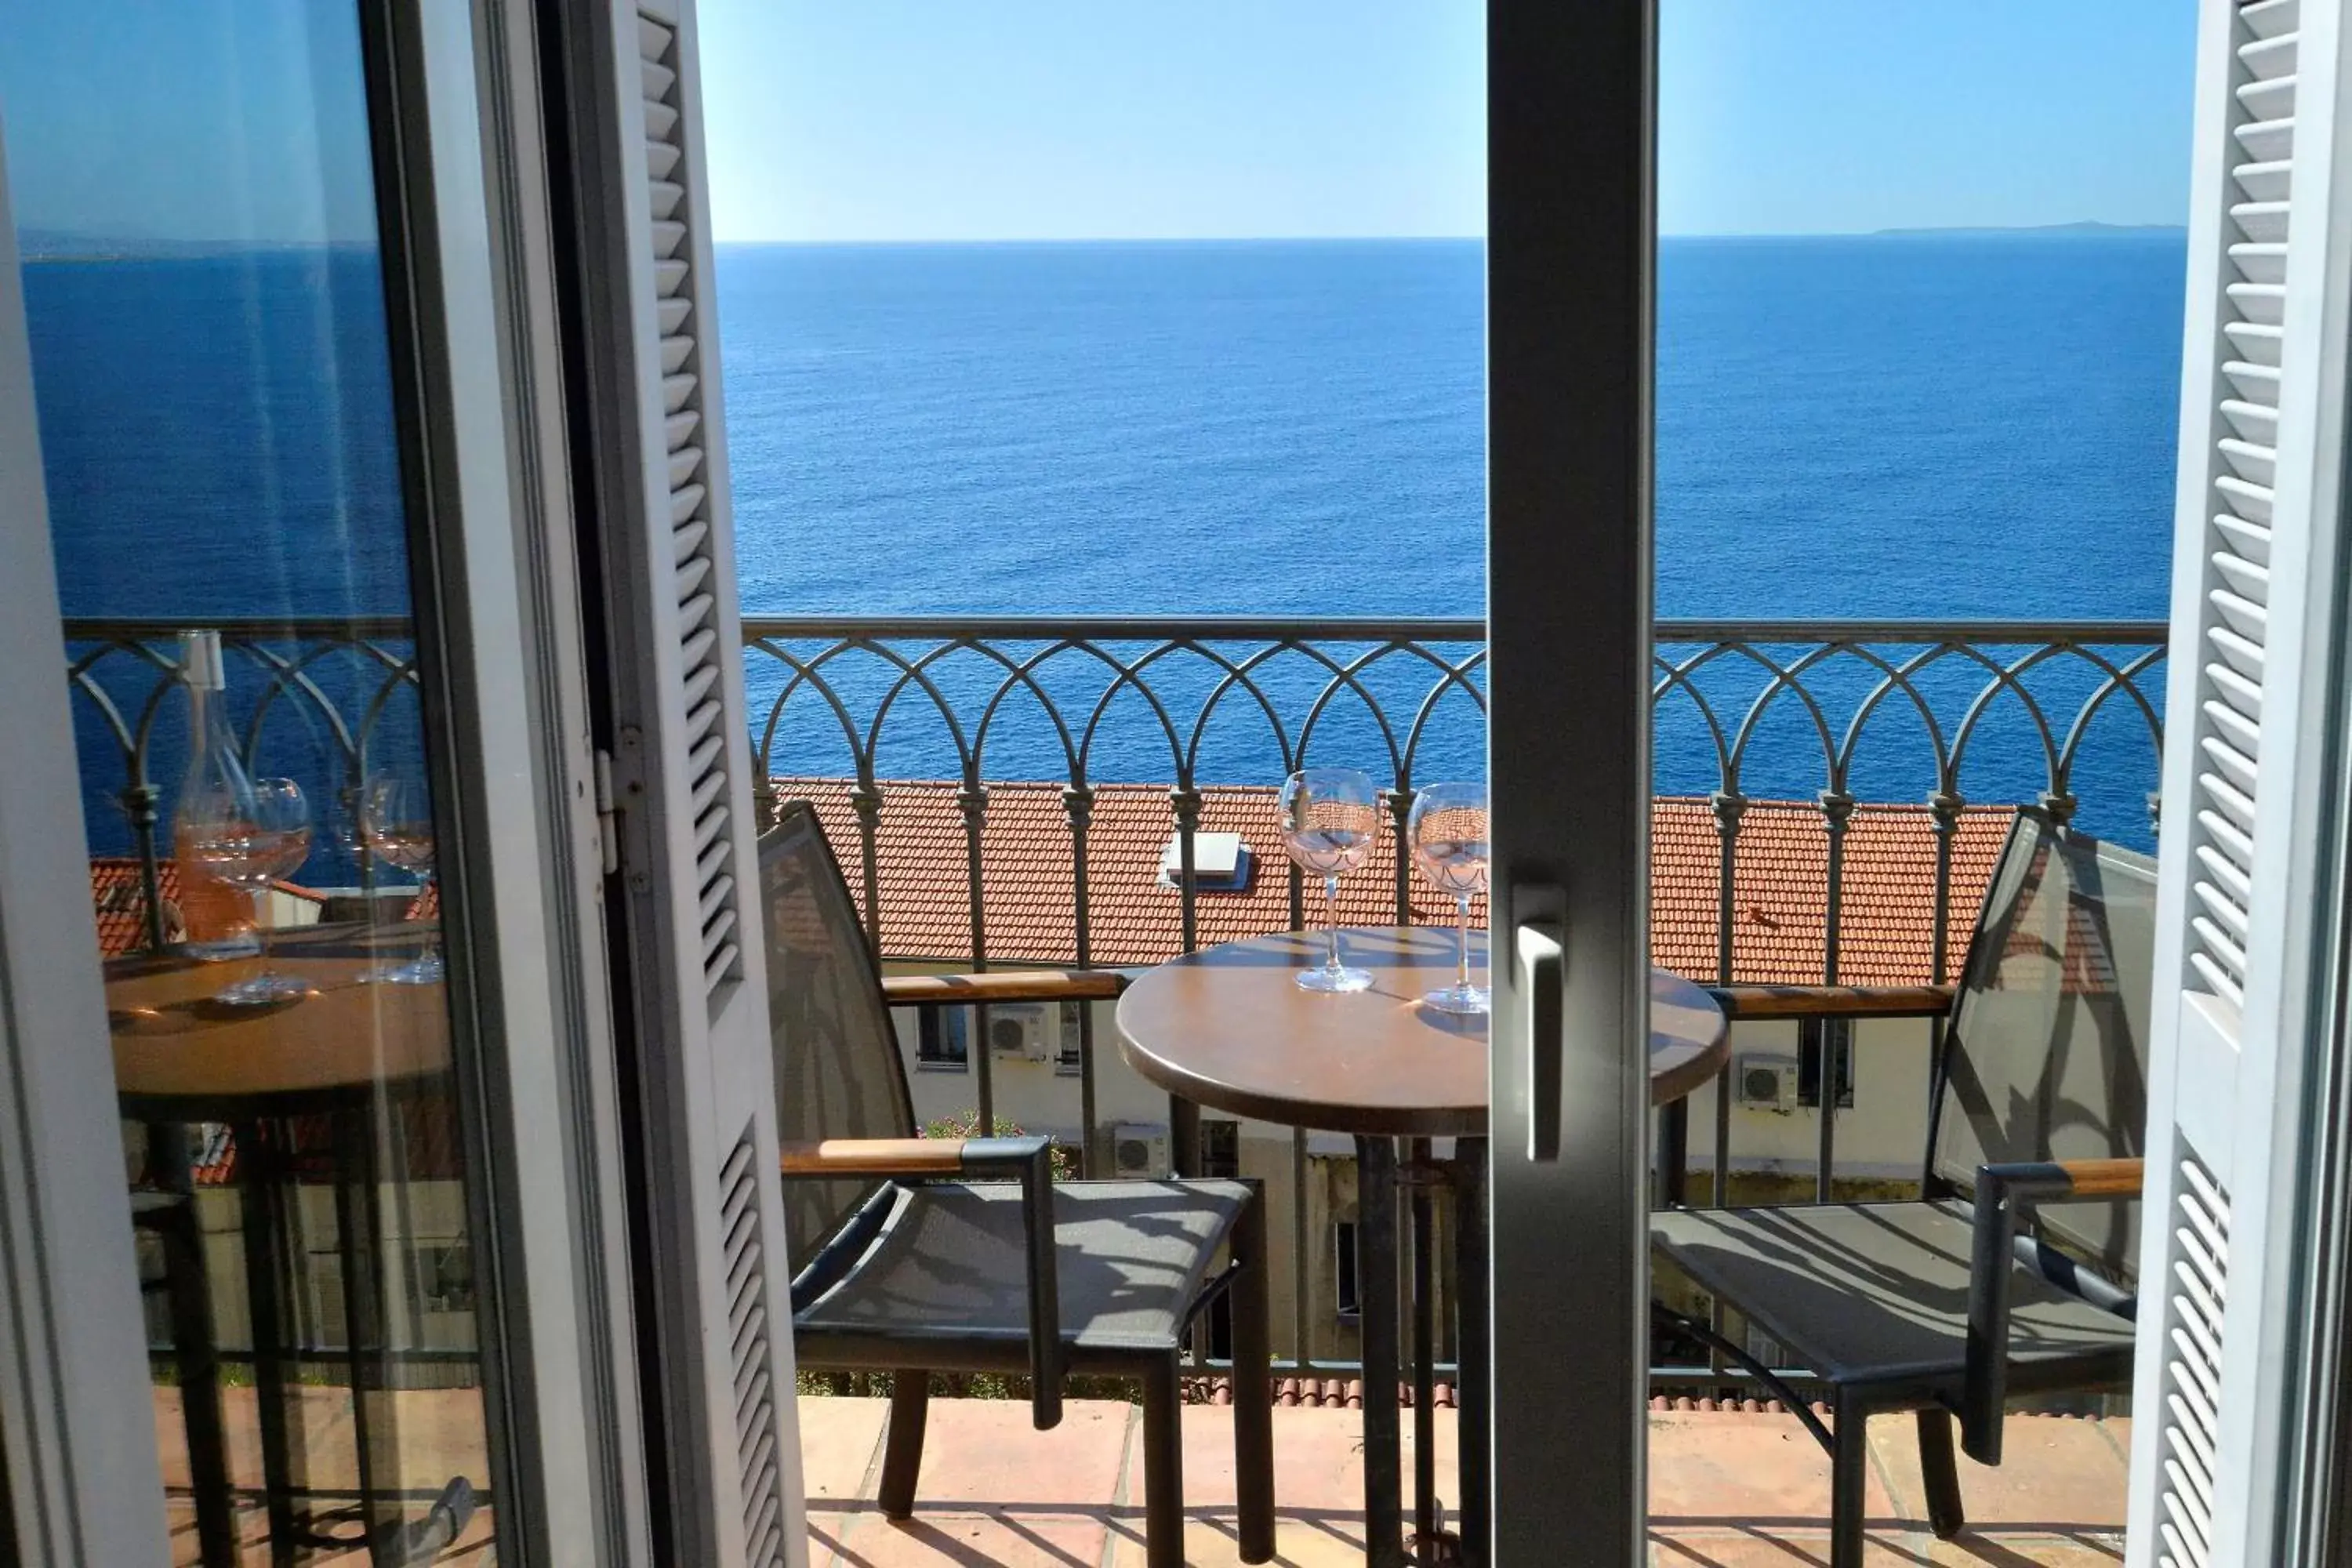 Sea view in Hôtel La Pérouse Nice Baie des Anges - Recently fully renovated